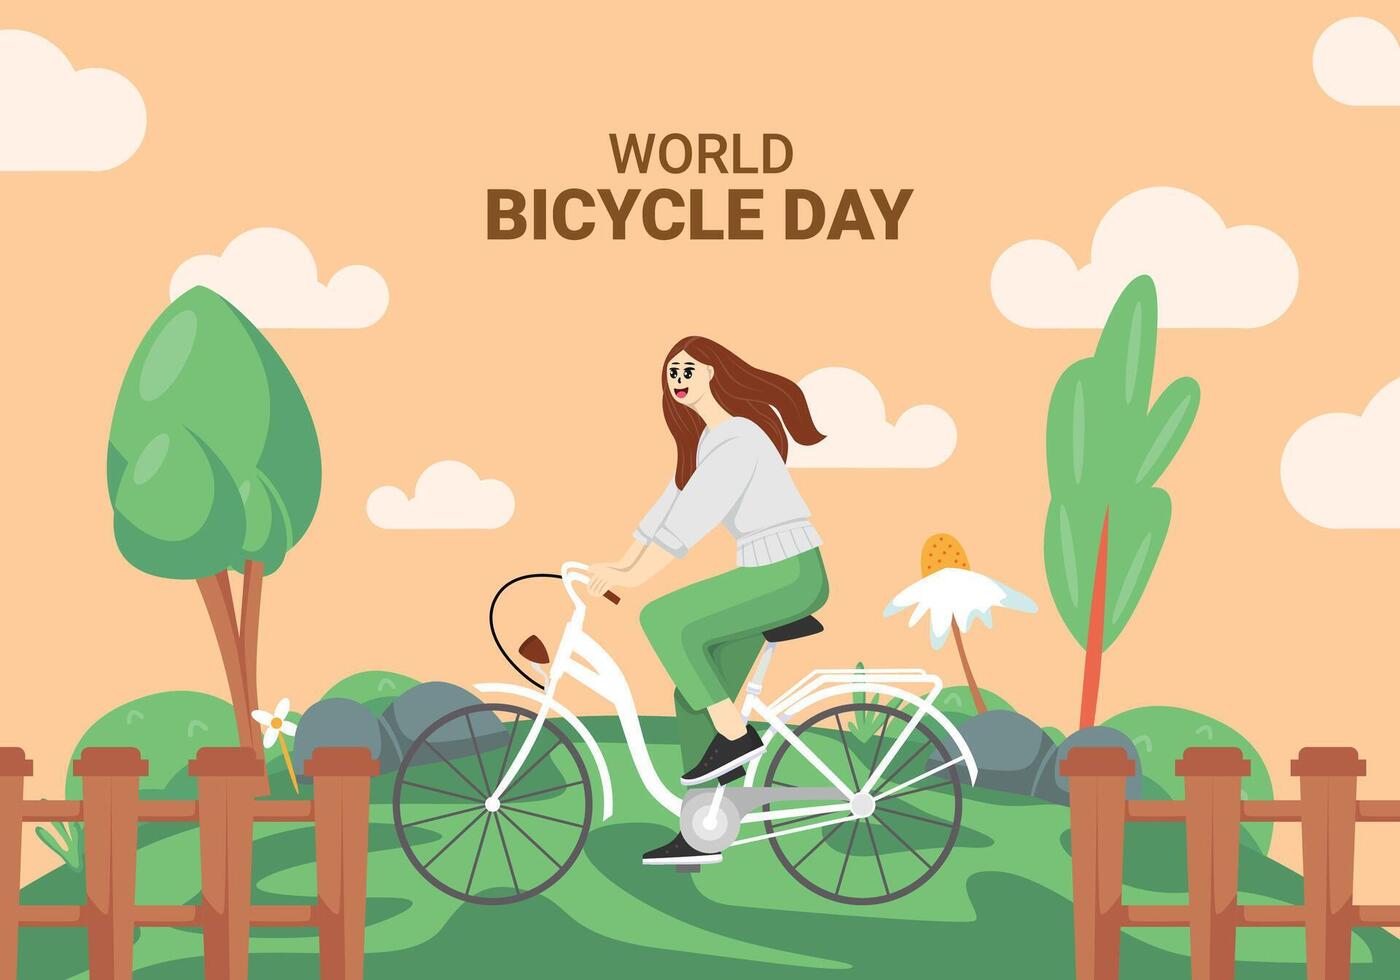 World bicycle day background illustration vector